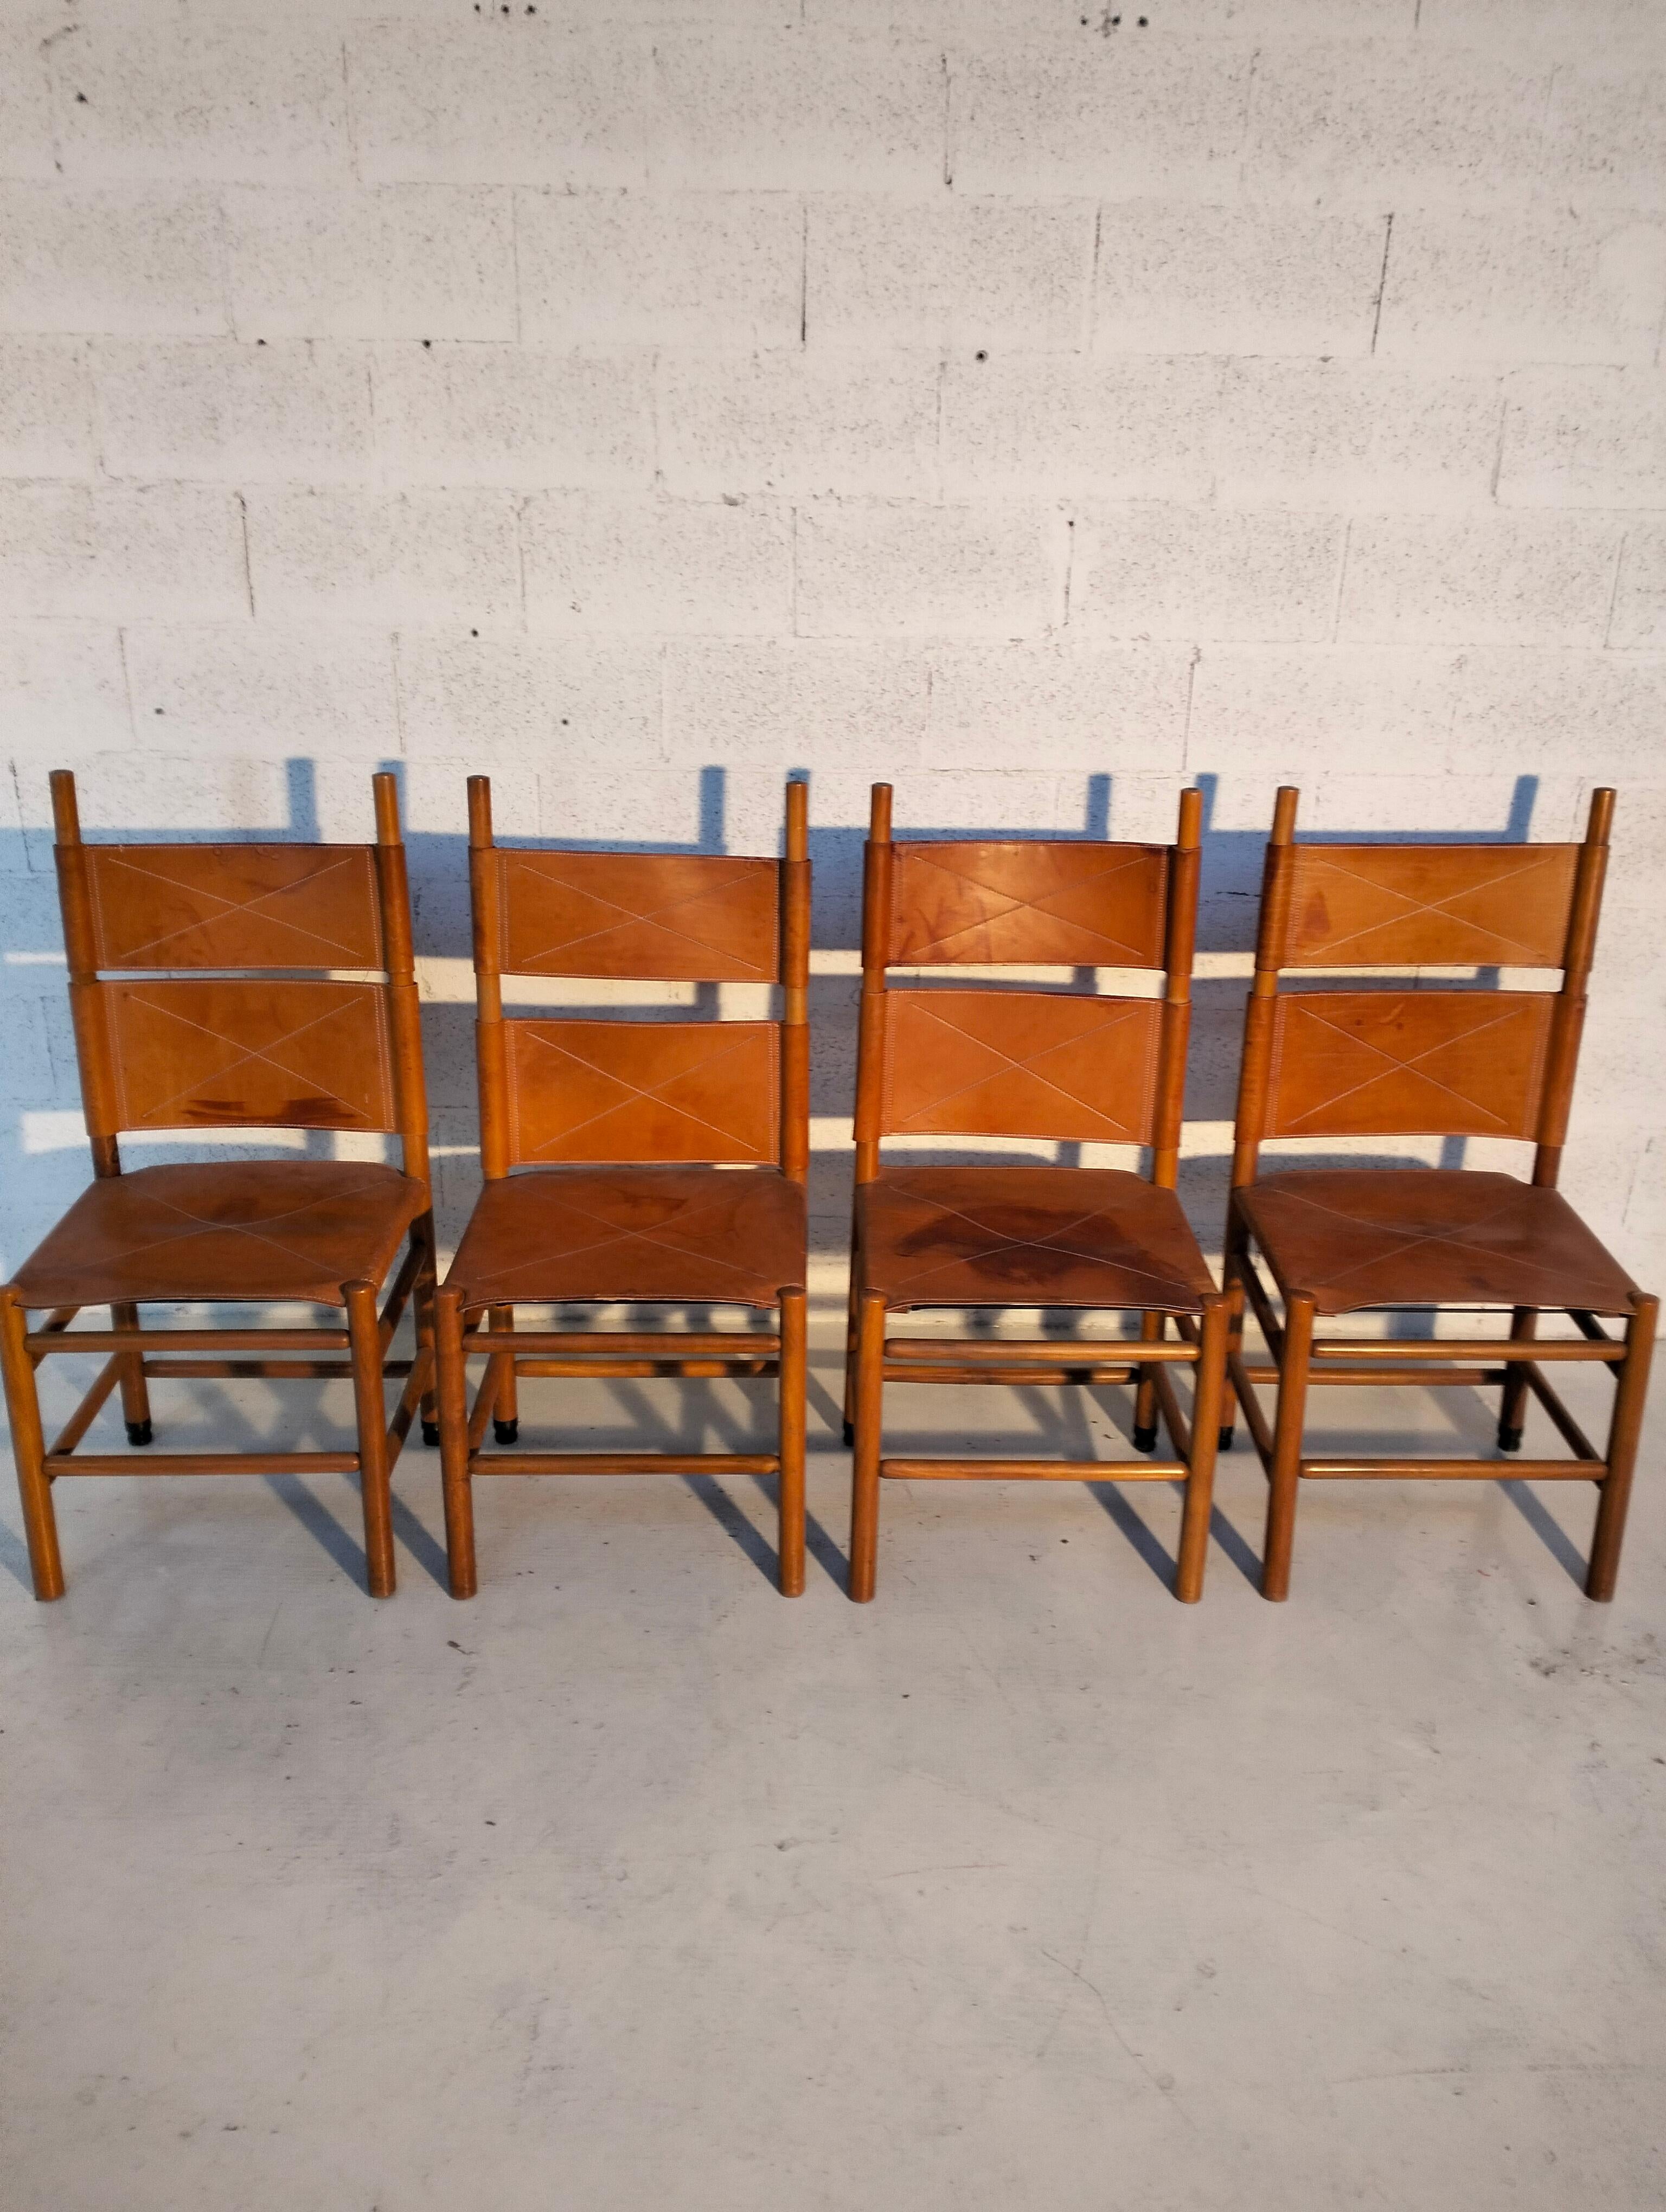 Late 20th Century Set of 4 chairs  “Kentucky” model by Carlo Scarpa  for Bernini 70s, 80s